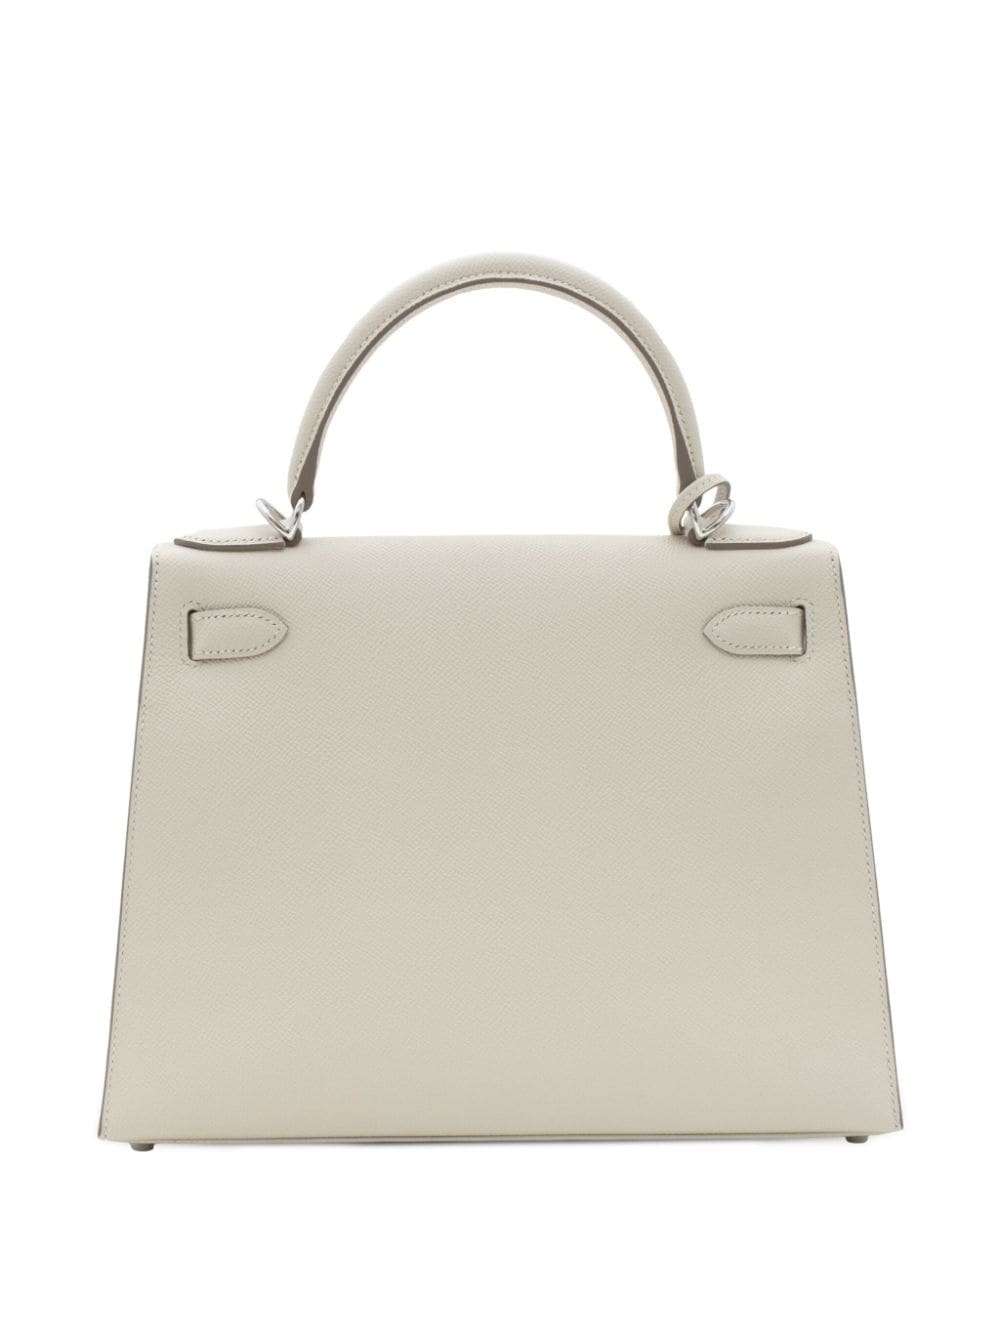 Hermès 2022 Pre-owned Kelly Sellier 28 Two-Way Bag - White